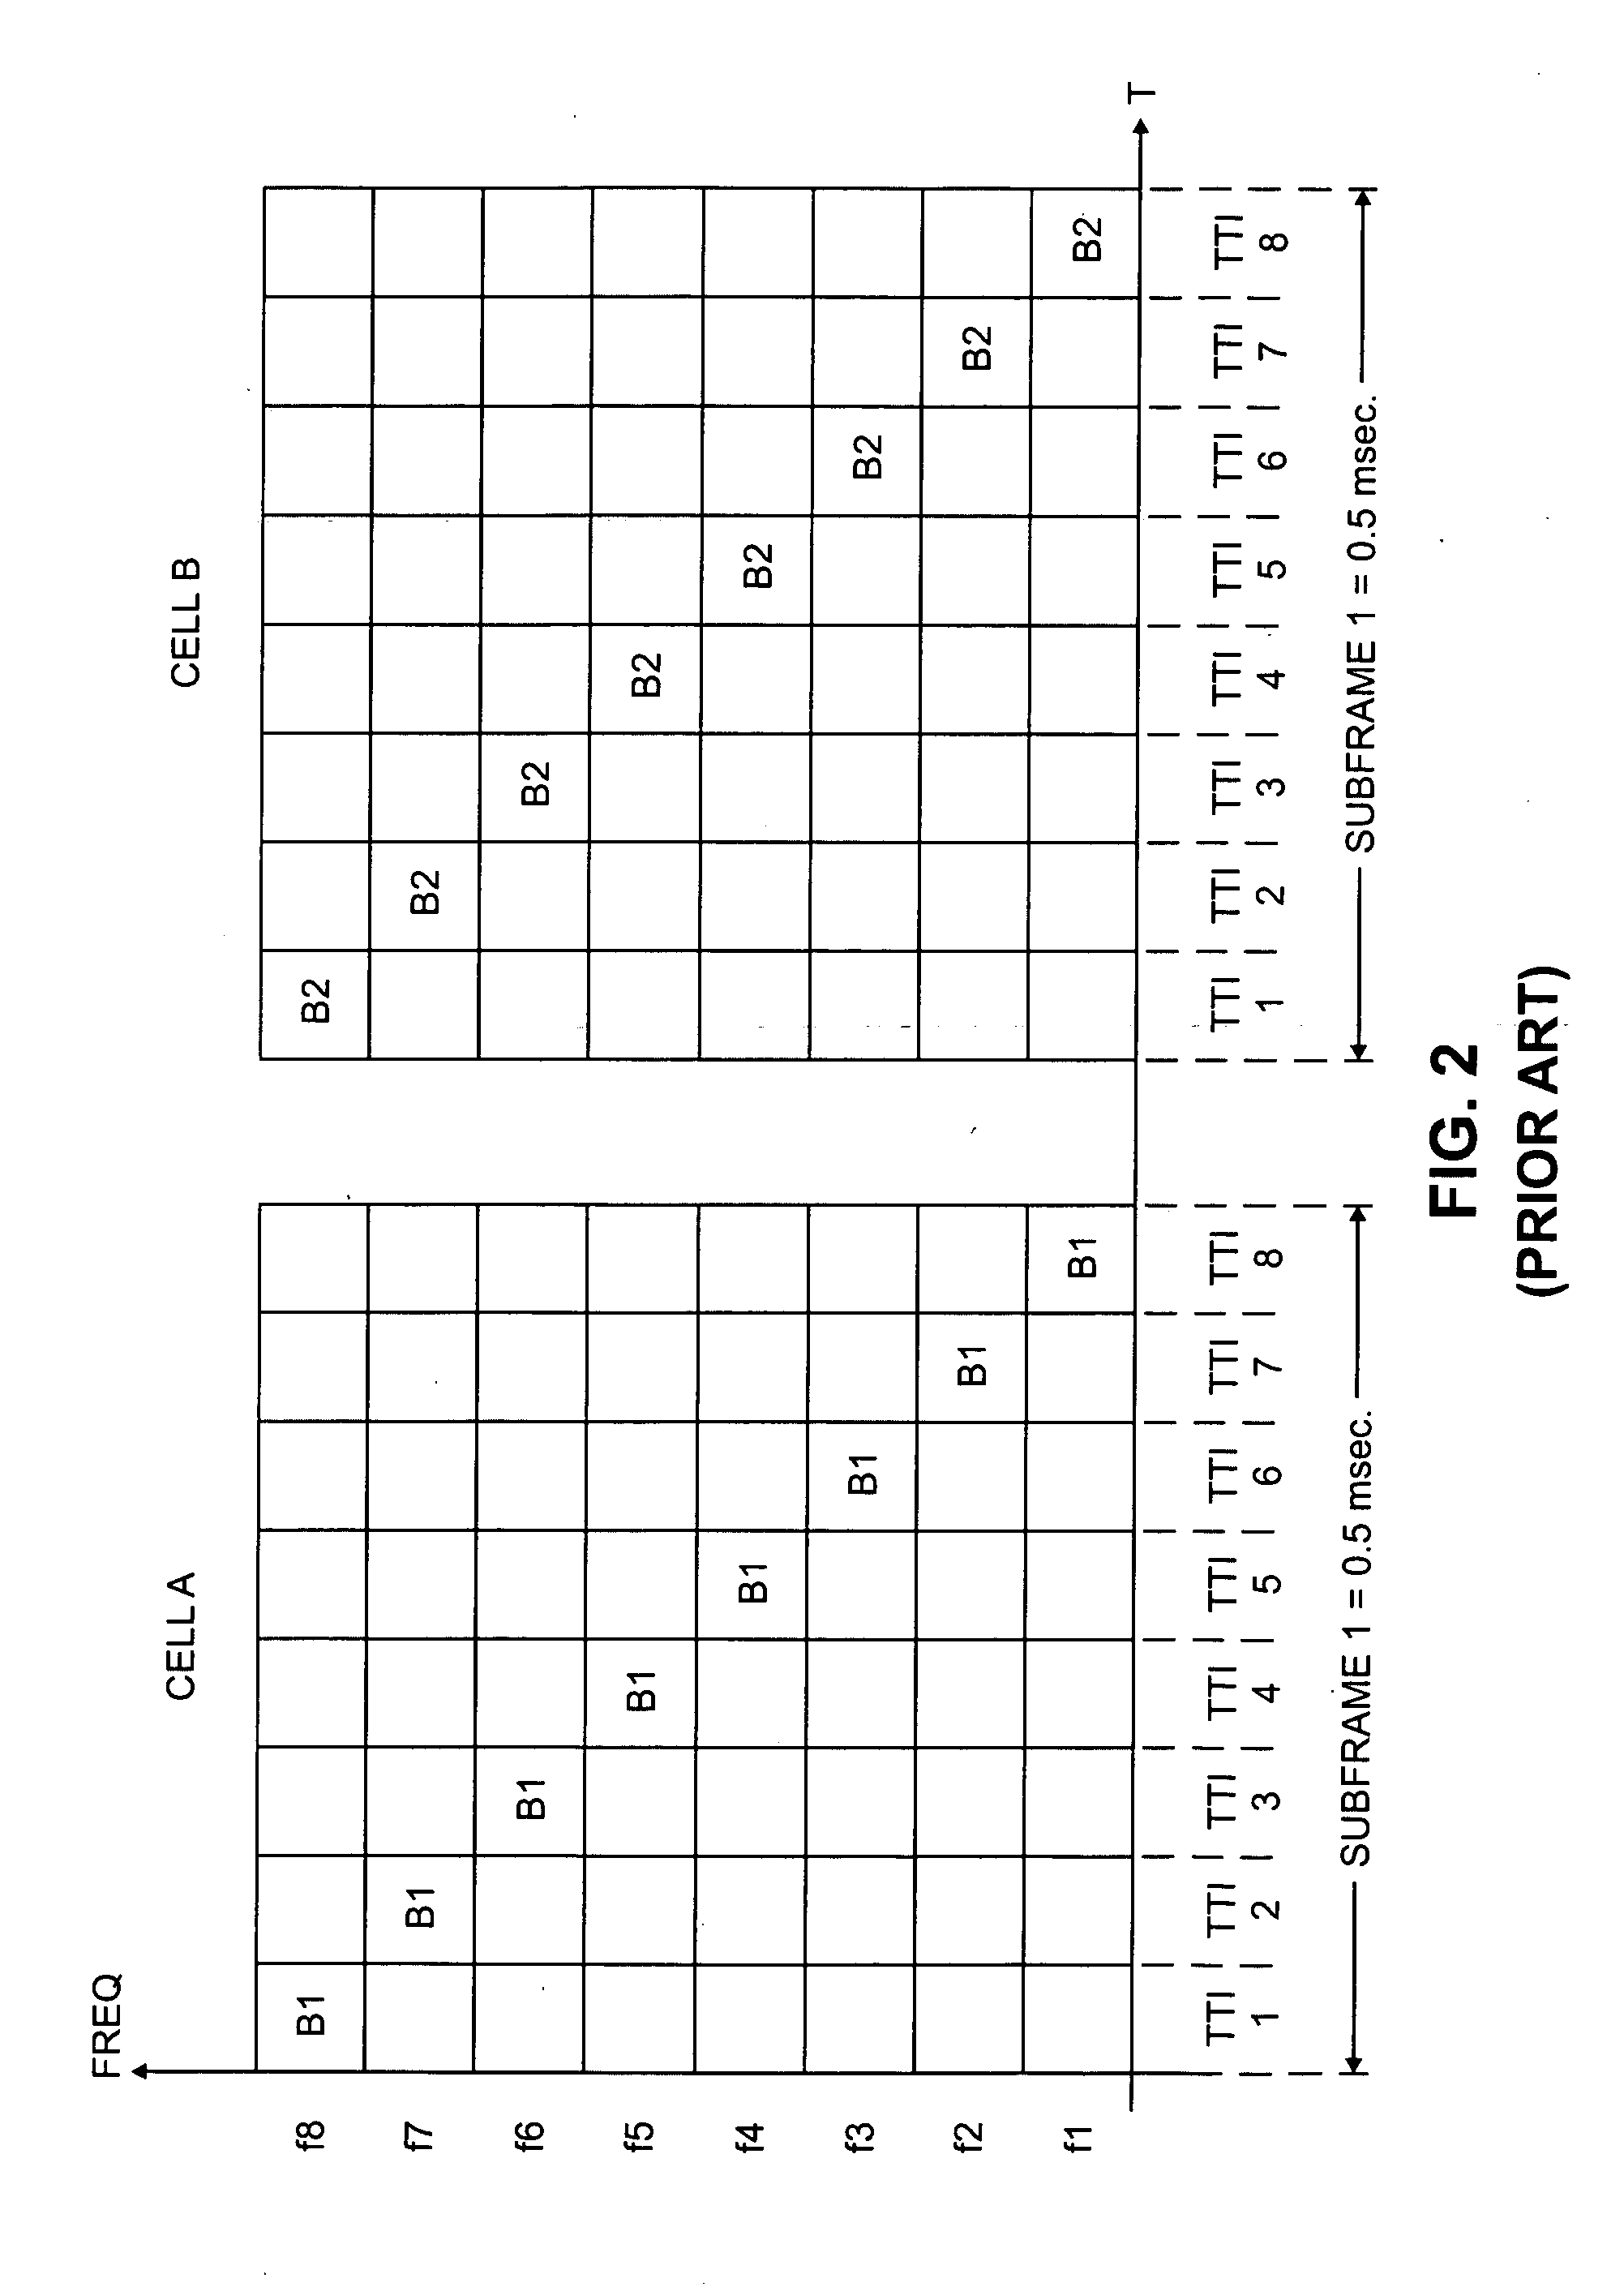 Broadcast scheme for a multi-carrier wireless network